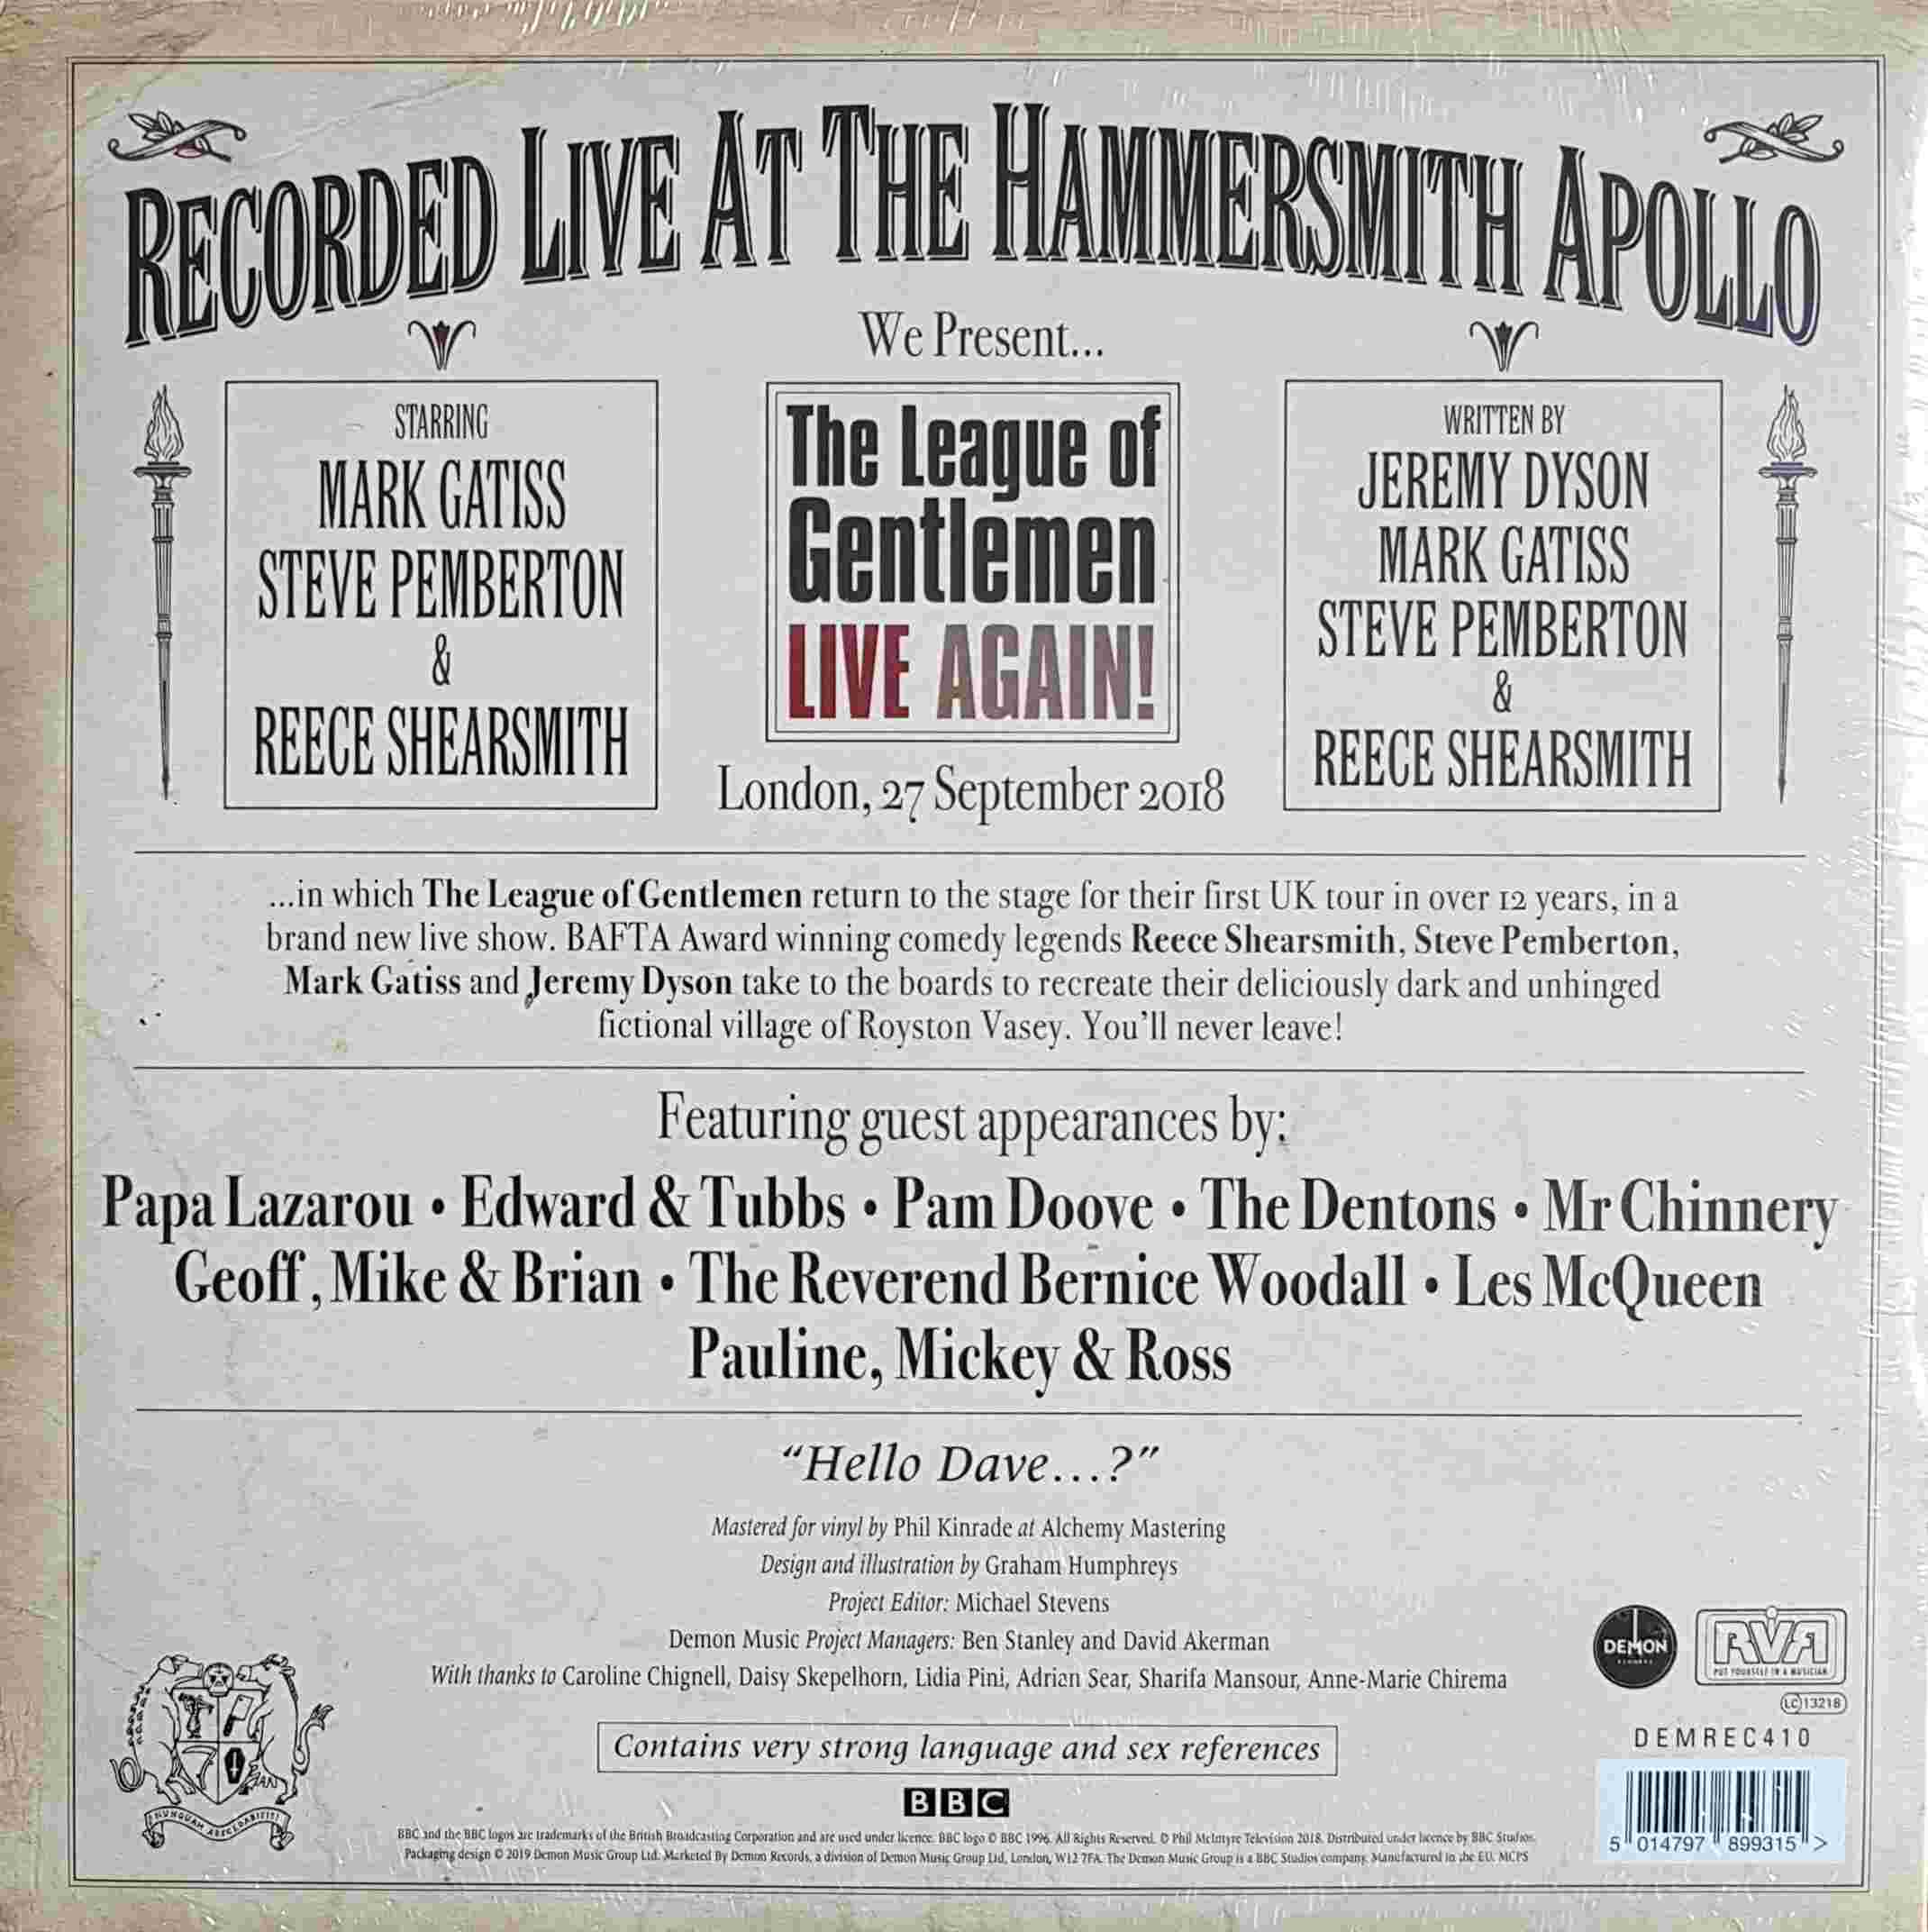 Picture of DEMREC 410 The league of gentlemen - Live again! - Record Store Day 2019 by artist Mark Gatiss / Steve Pembleton / Reece Shearsmith from the BBC records and Tapes library